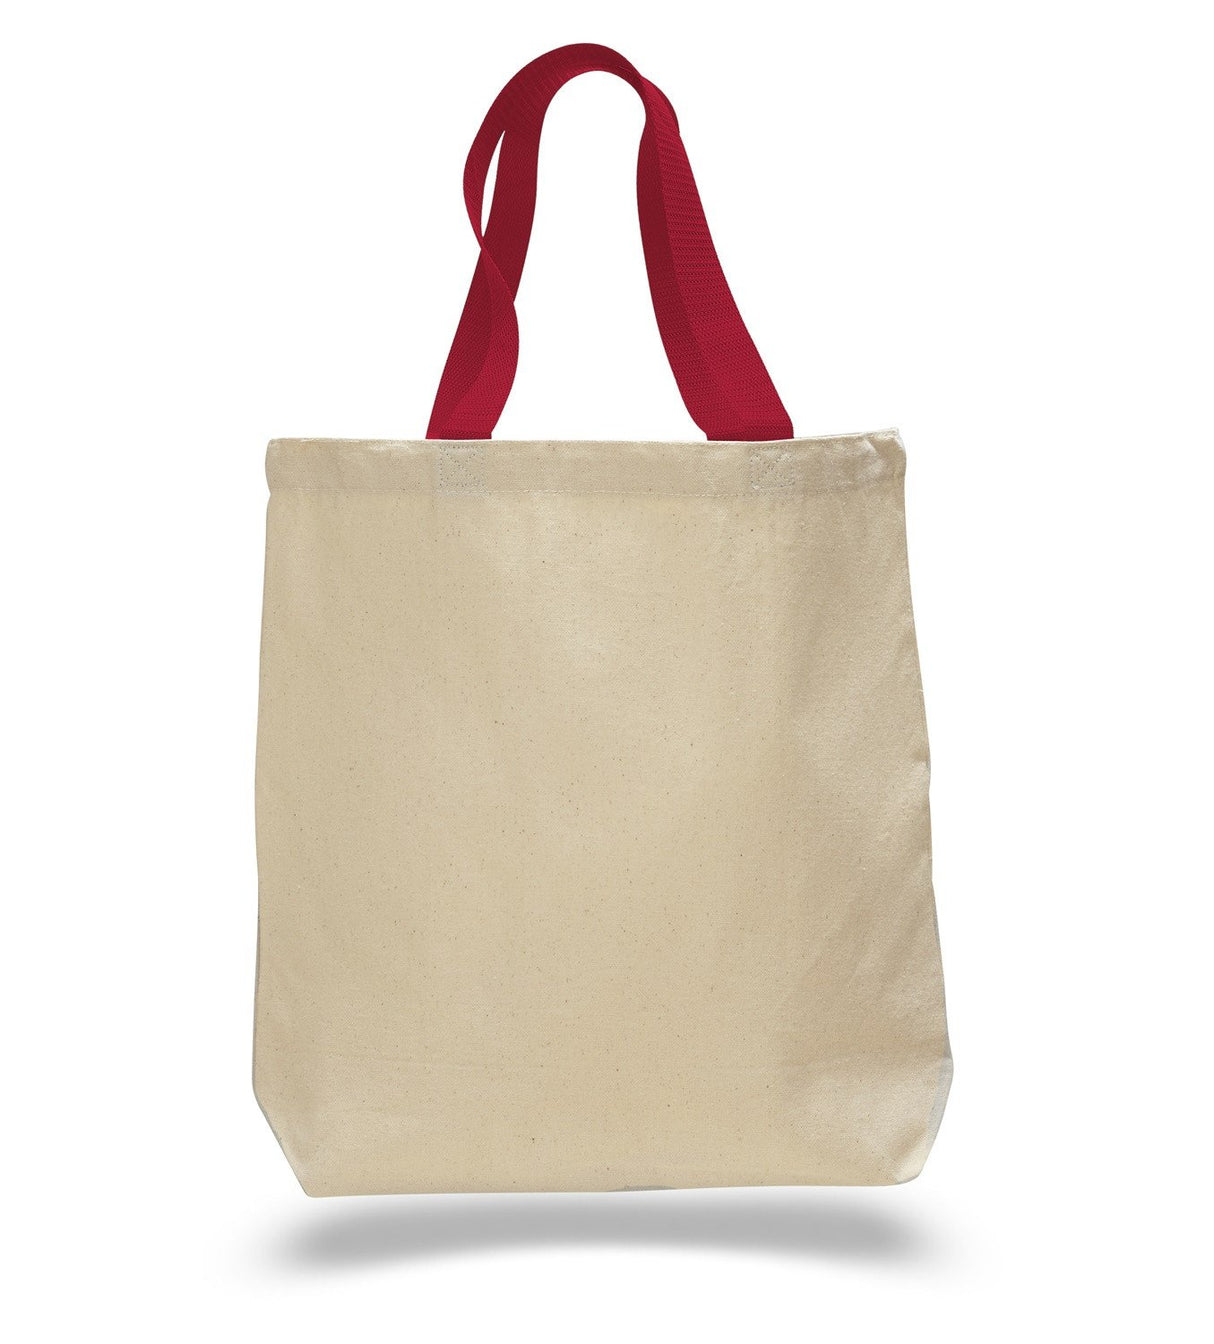 Buy 100% Pure Linen Bags and Totebags Online - Best Quality